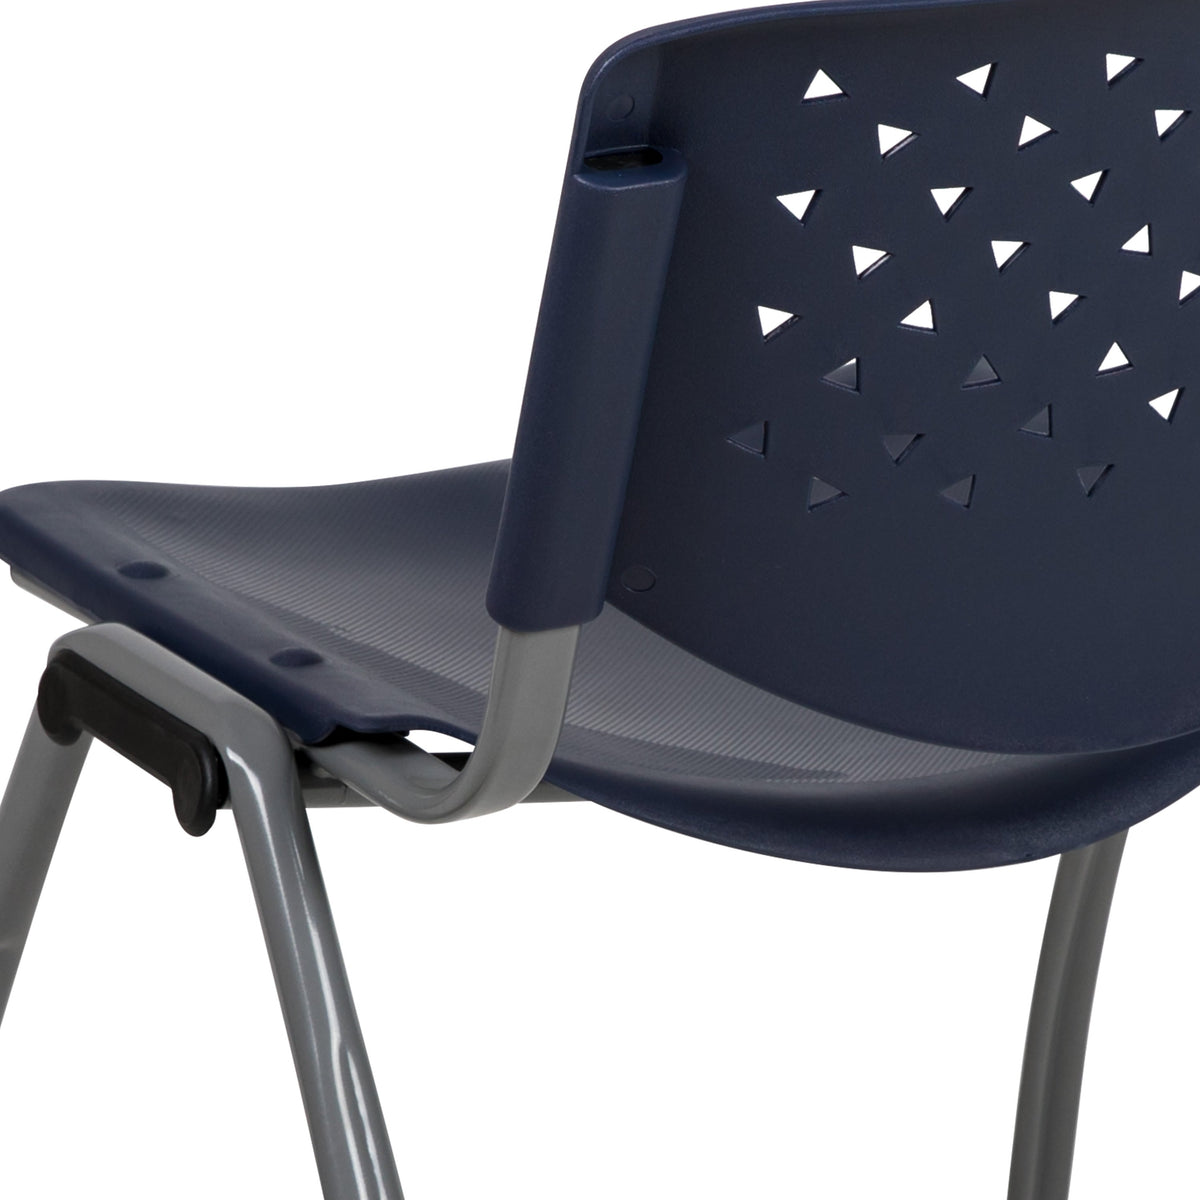 Navy |#| Home and Office Navy Plastic Stack Chair with Perforated Back - Guest Chair